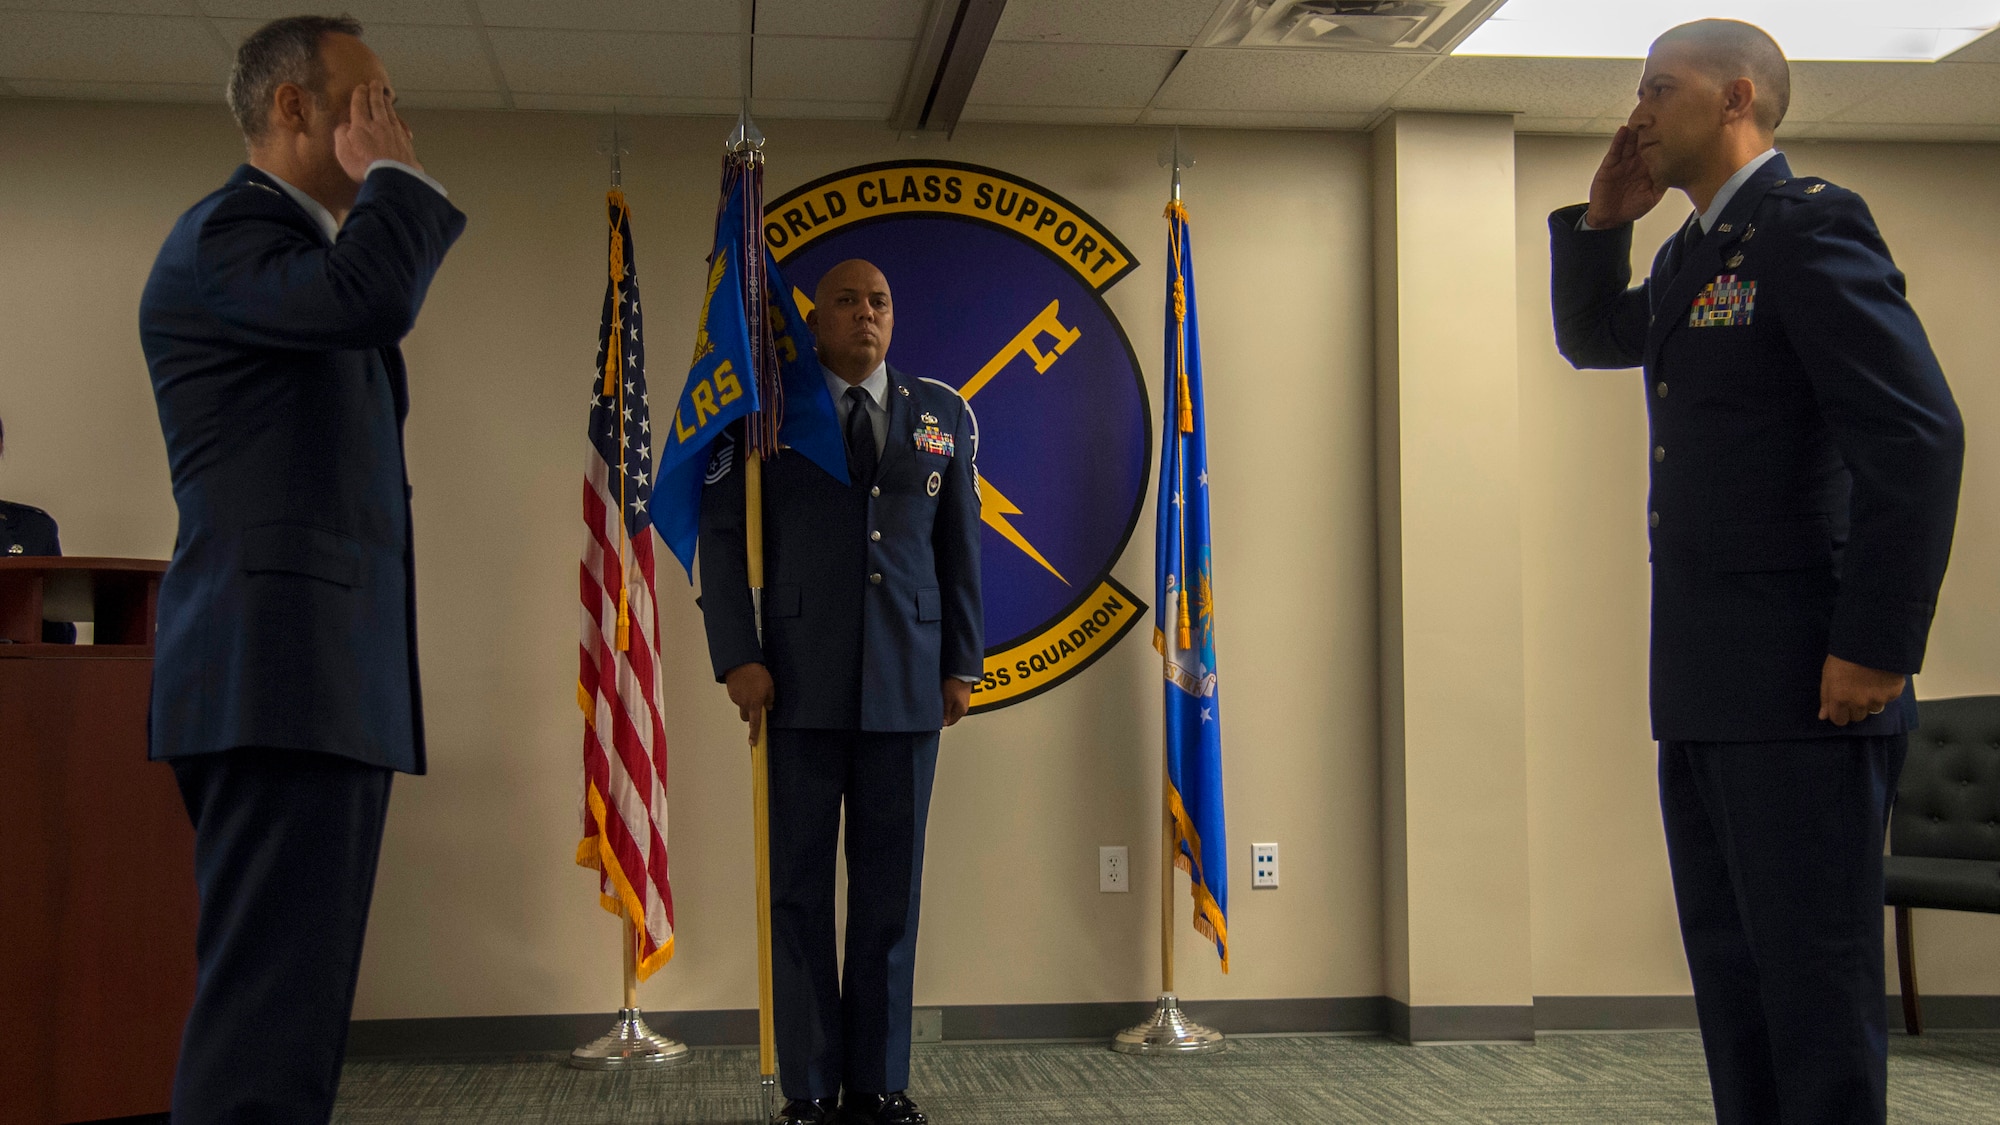 U.S. Air Force Col. Edward Phillips, the 6th Mission Support Group commander, salutes Lt. Col. Christopher Martagon, the 6th Logistics Readiness Squadron commander, during a change of command ceremony, June 12, 2020, at MacDill Air Force Base, Fla.